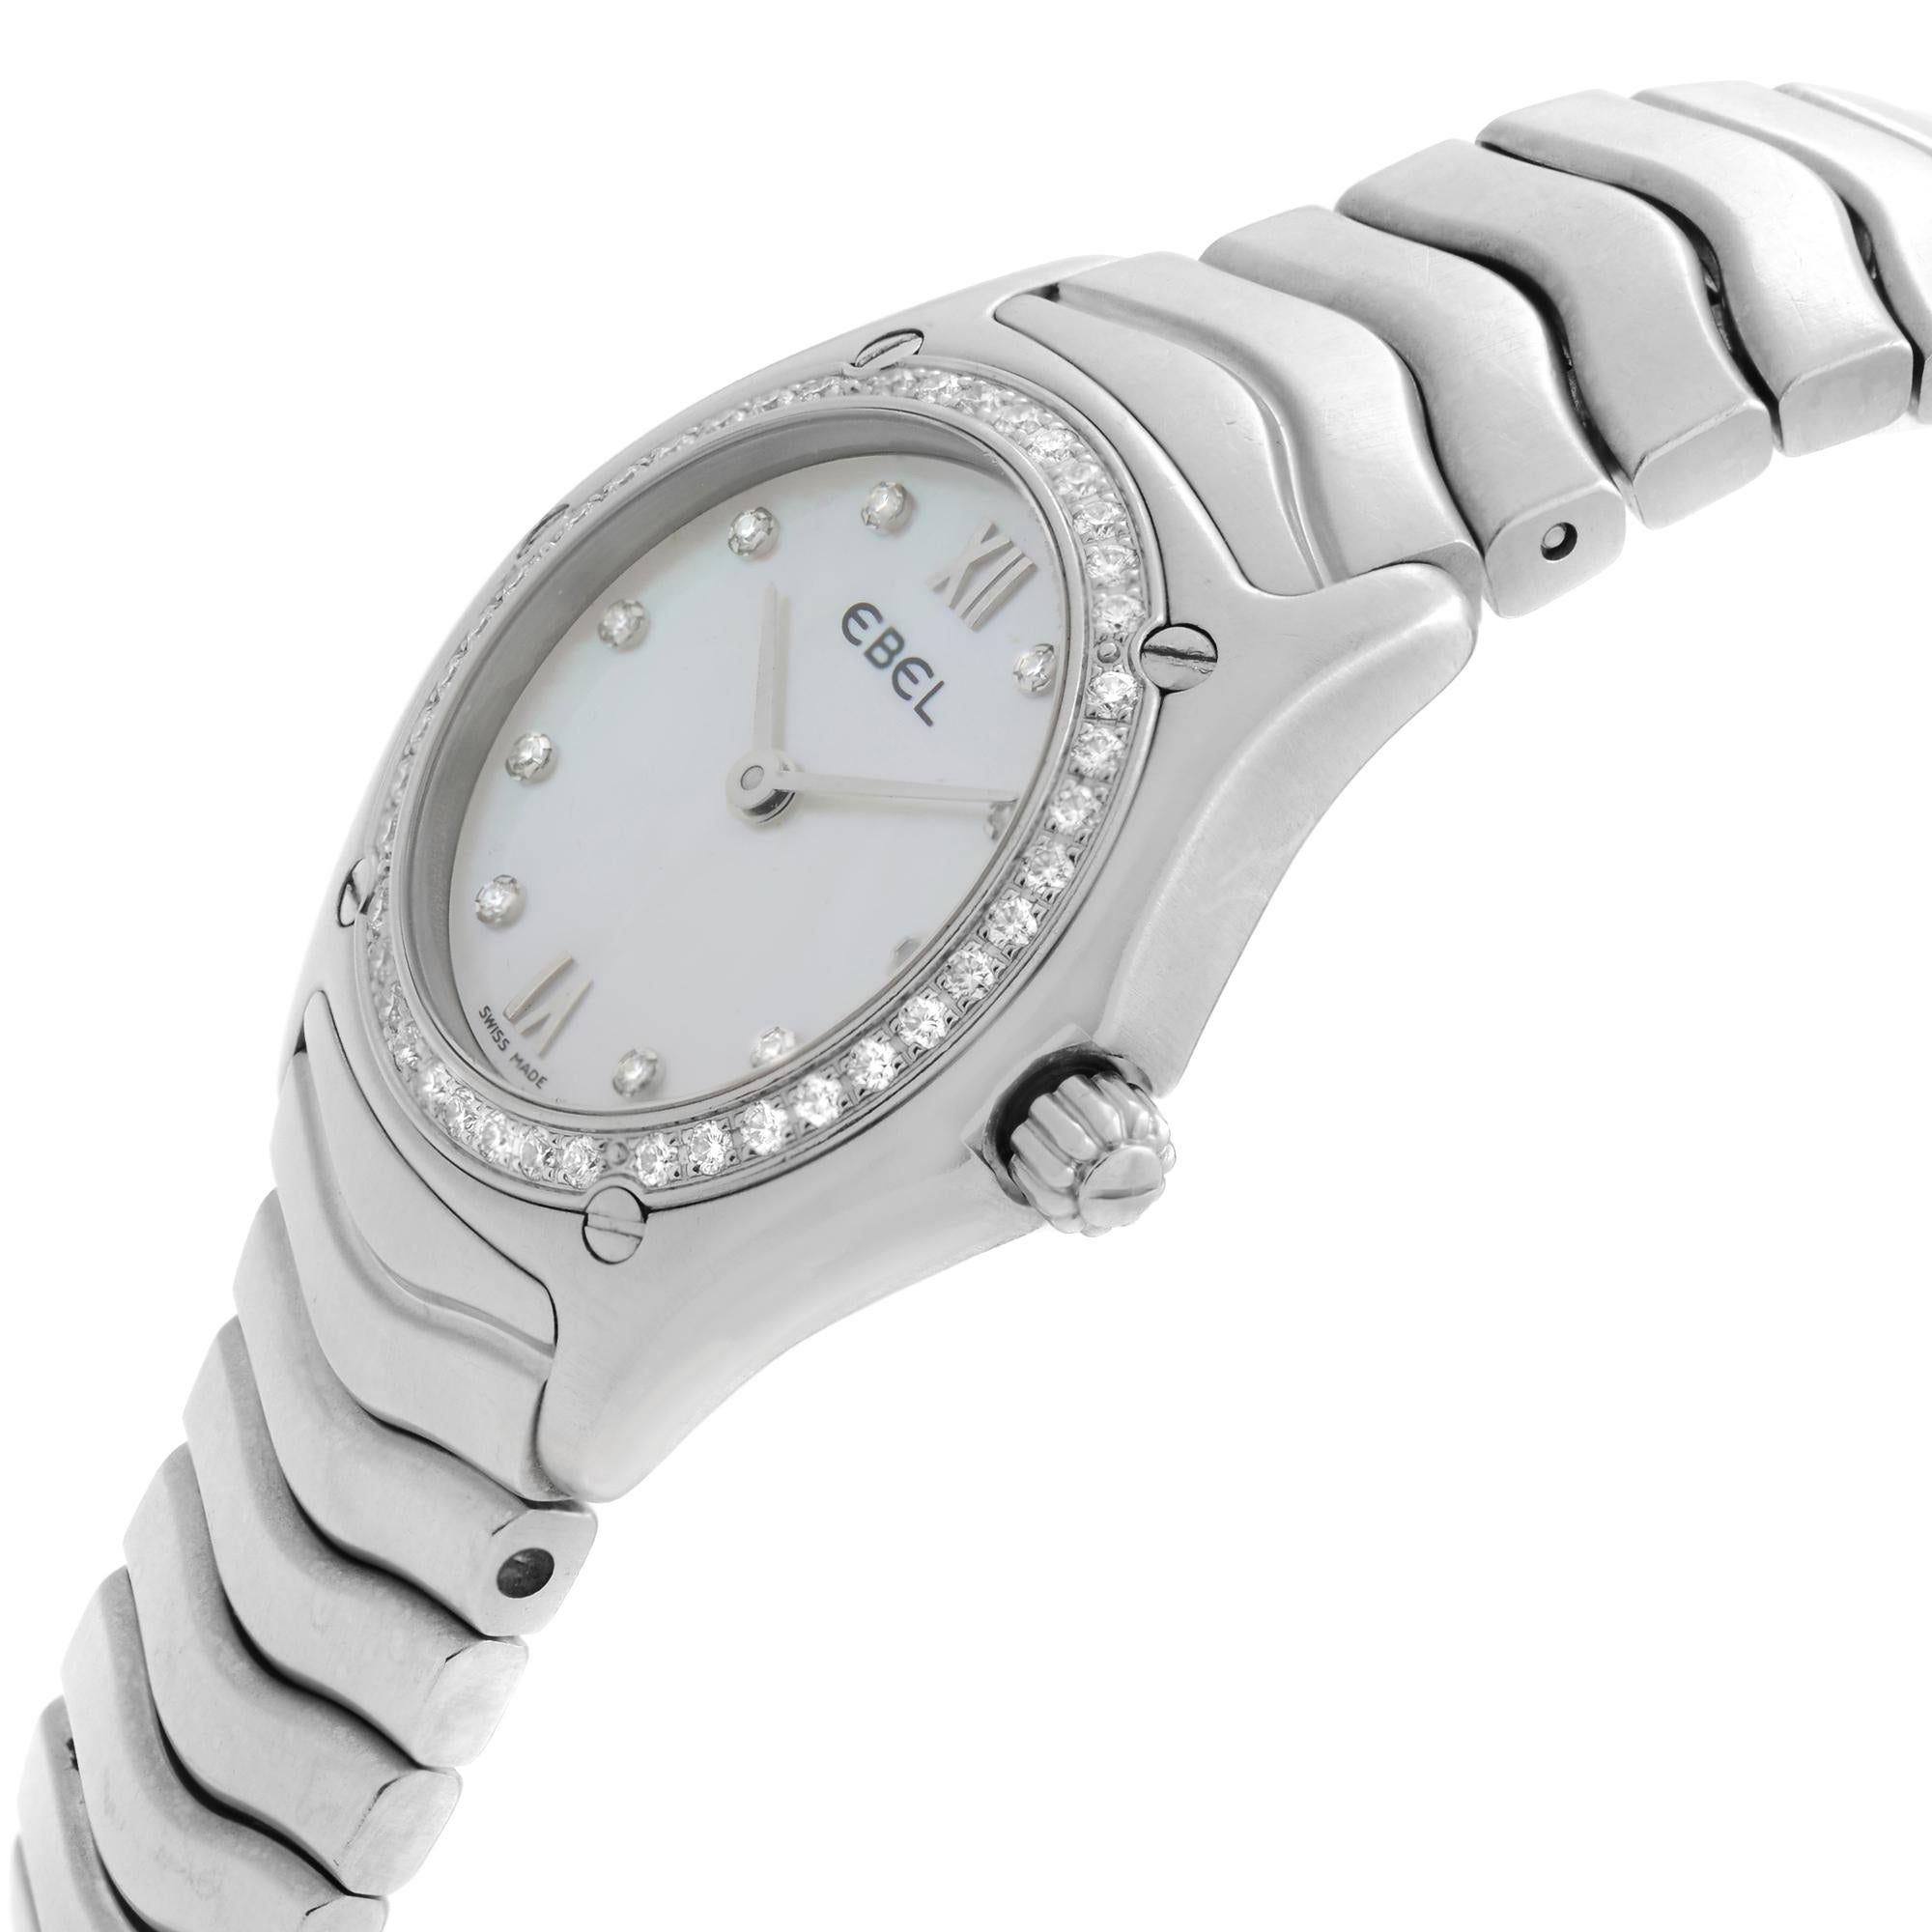 Pre Owned Ebel Classic Wave Steel MOP Dial Diamond Bezel Ladies Quartz Watch 9090F24-9725. This Beautiful Timepiece is Powered by Quartz (Battery) Movement And Features: Round Stainless Steel Case & Bracelet Fixed Stainless Steel Diamond Set Bezel,